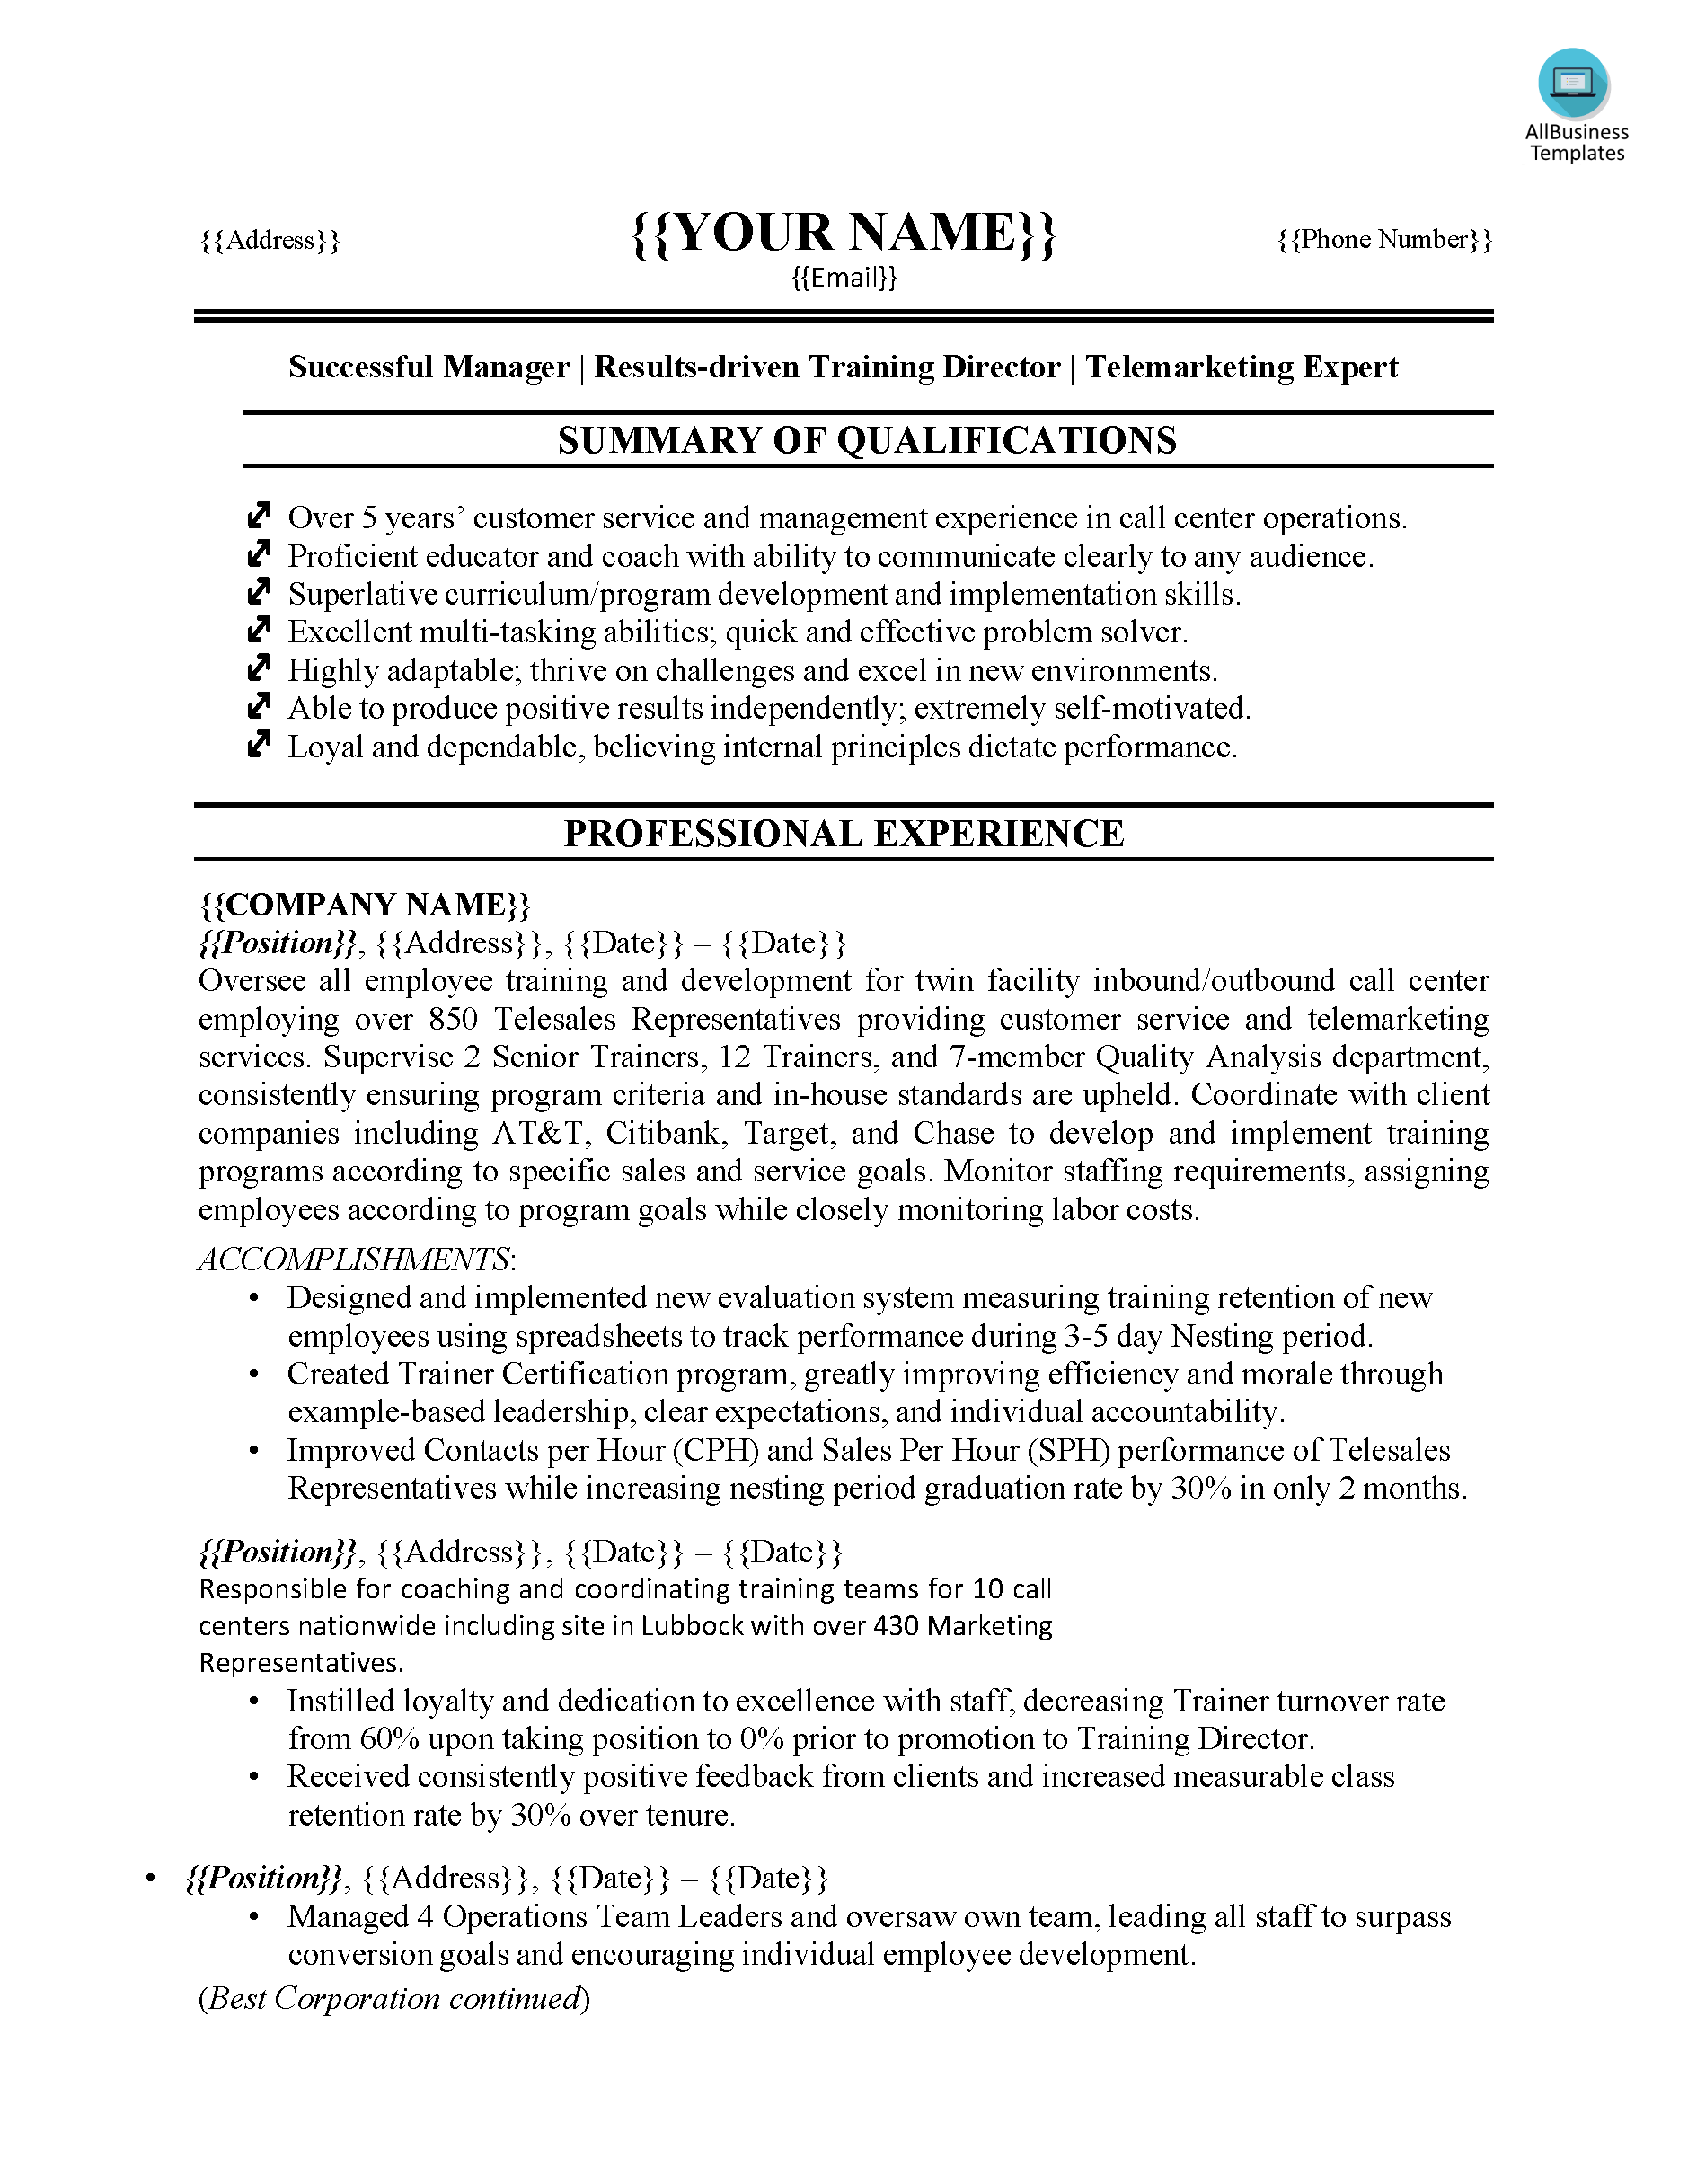 resume for customer service jobs with no experience